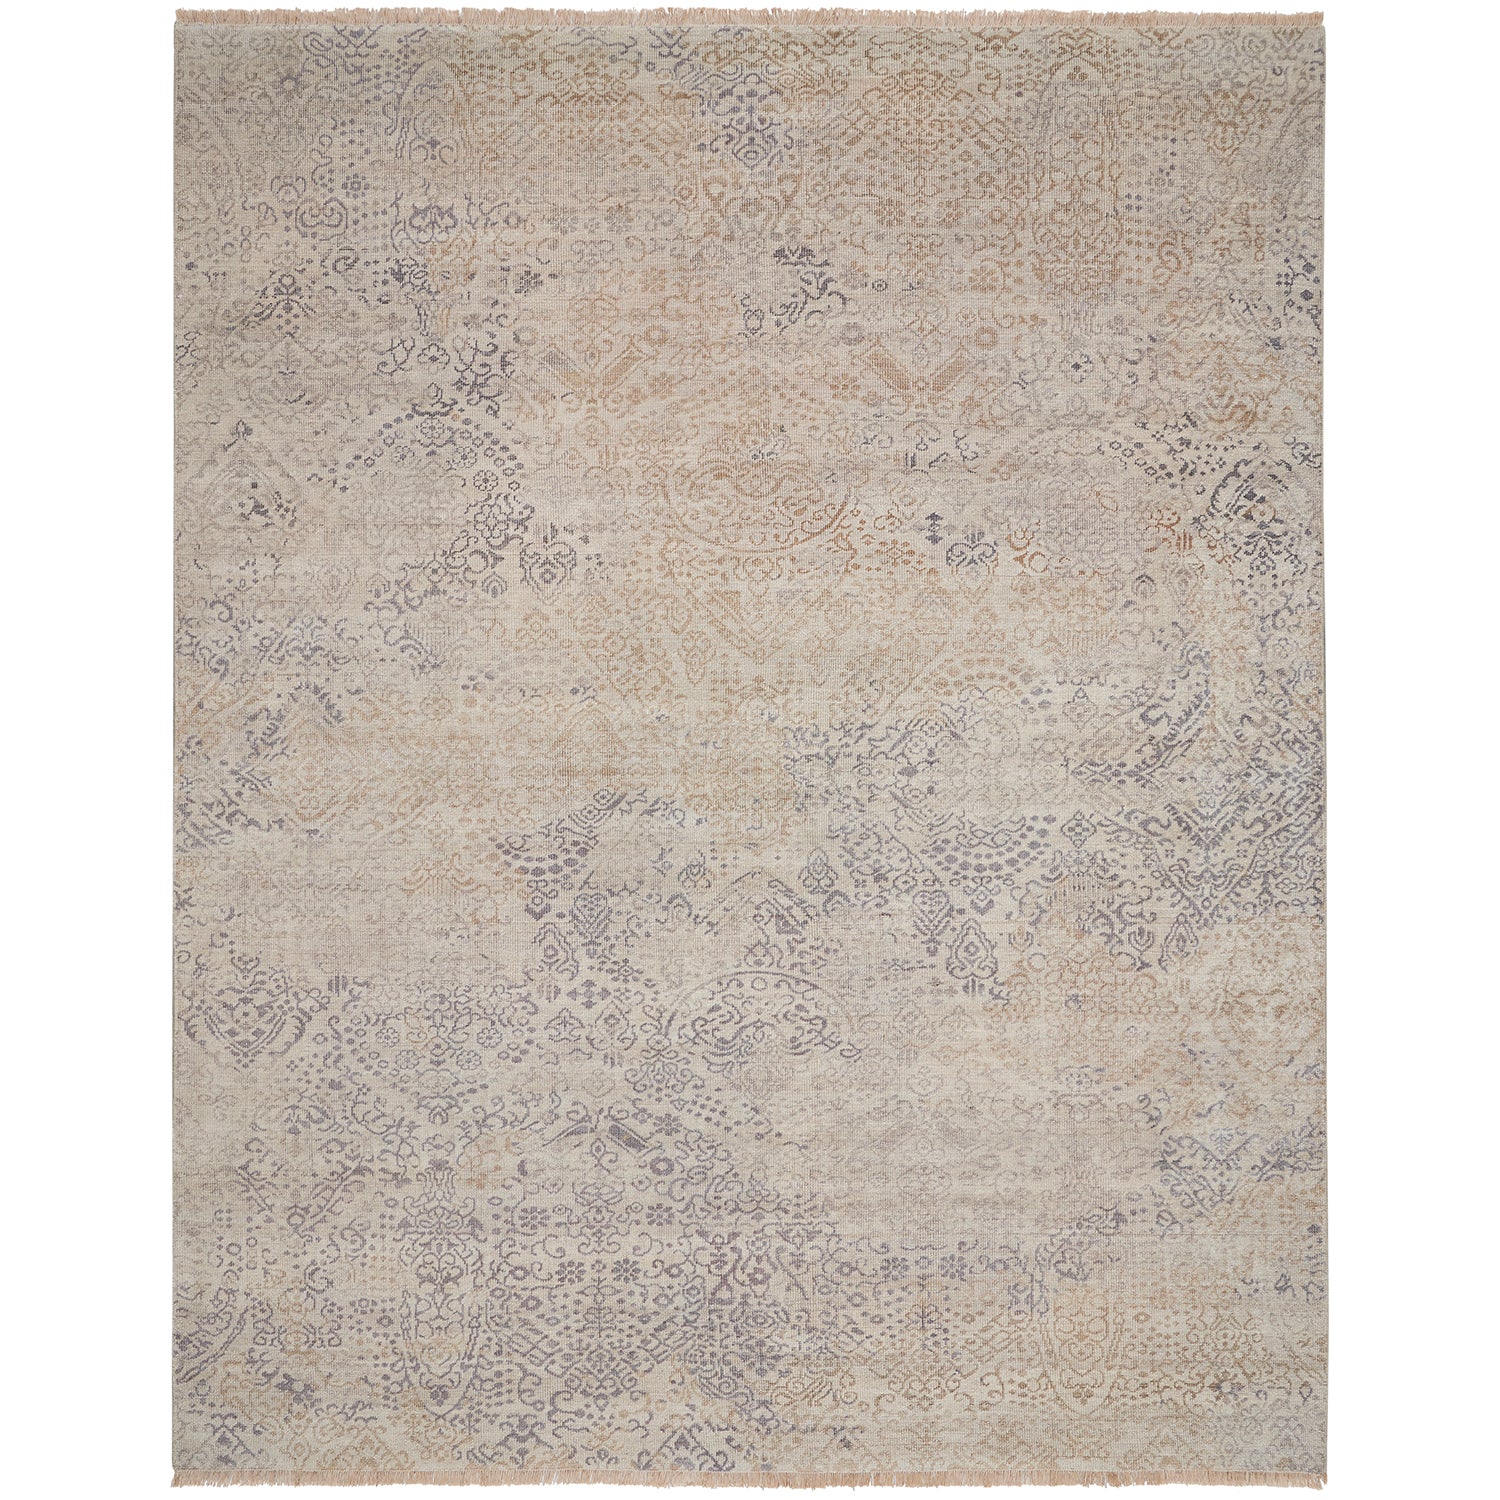 Vintage-inspired rectangular rug with intricate patterns and muted color palette.